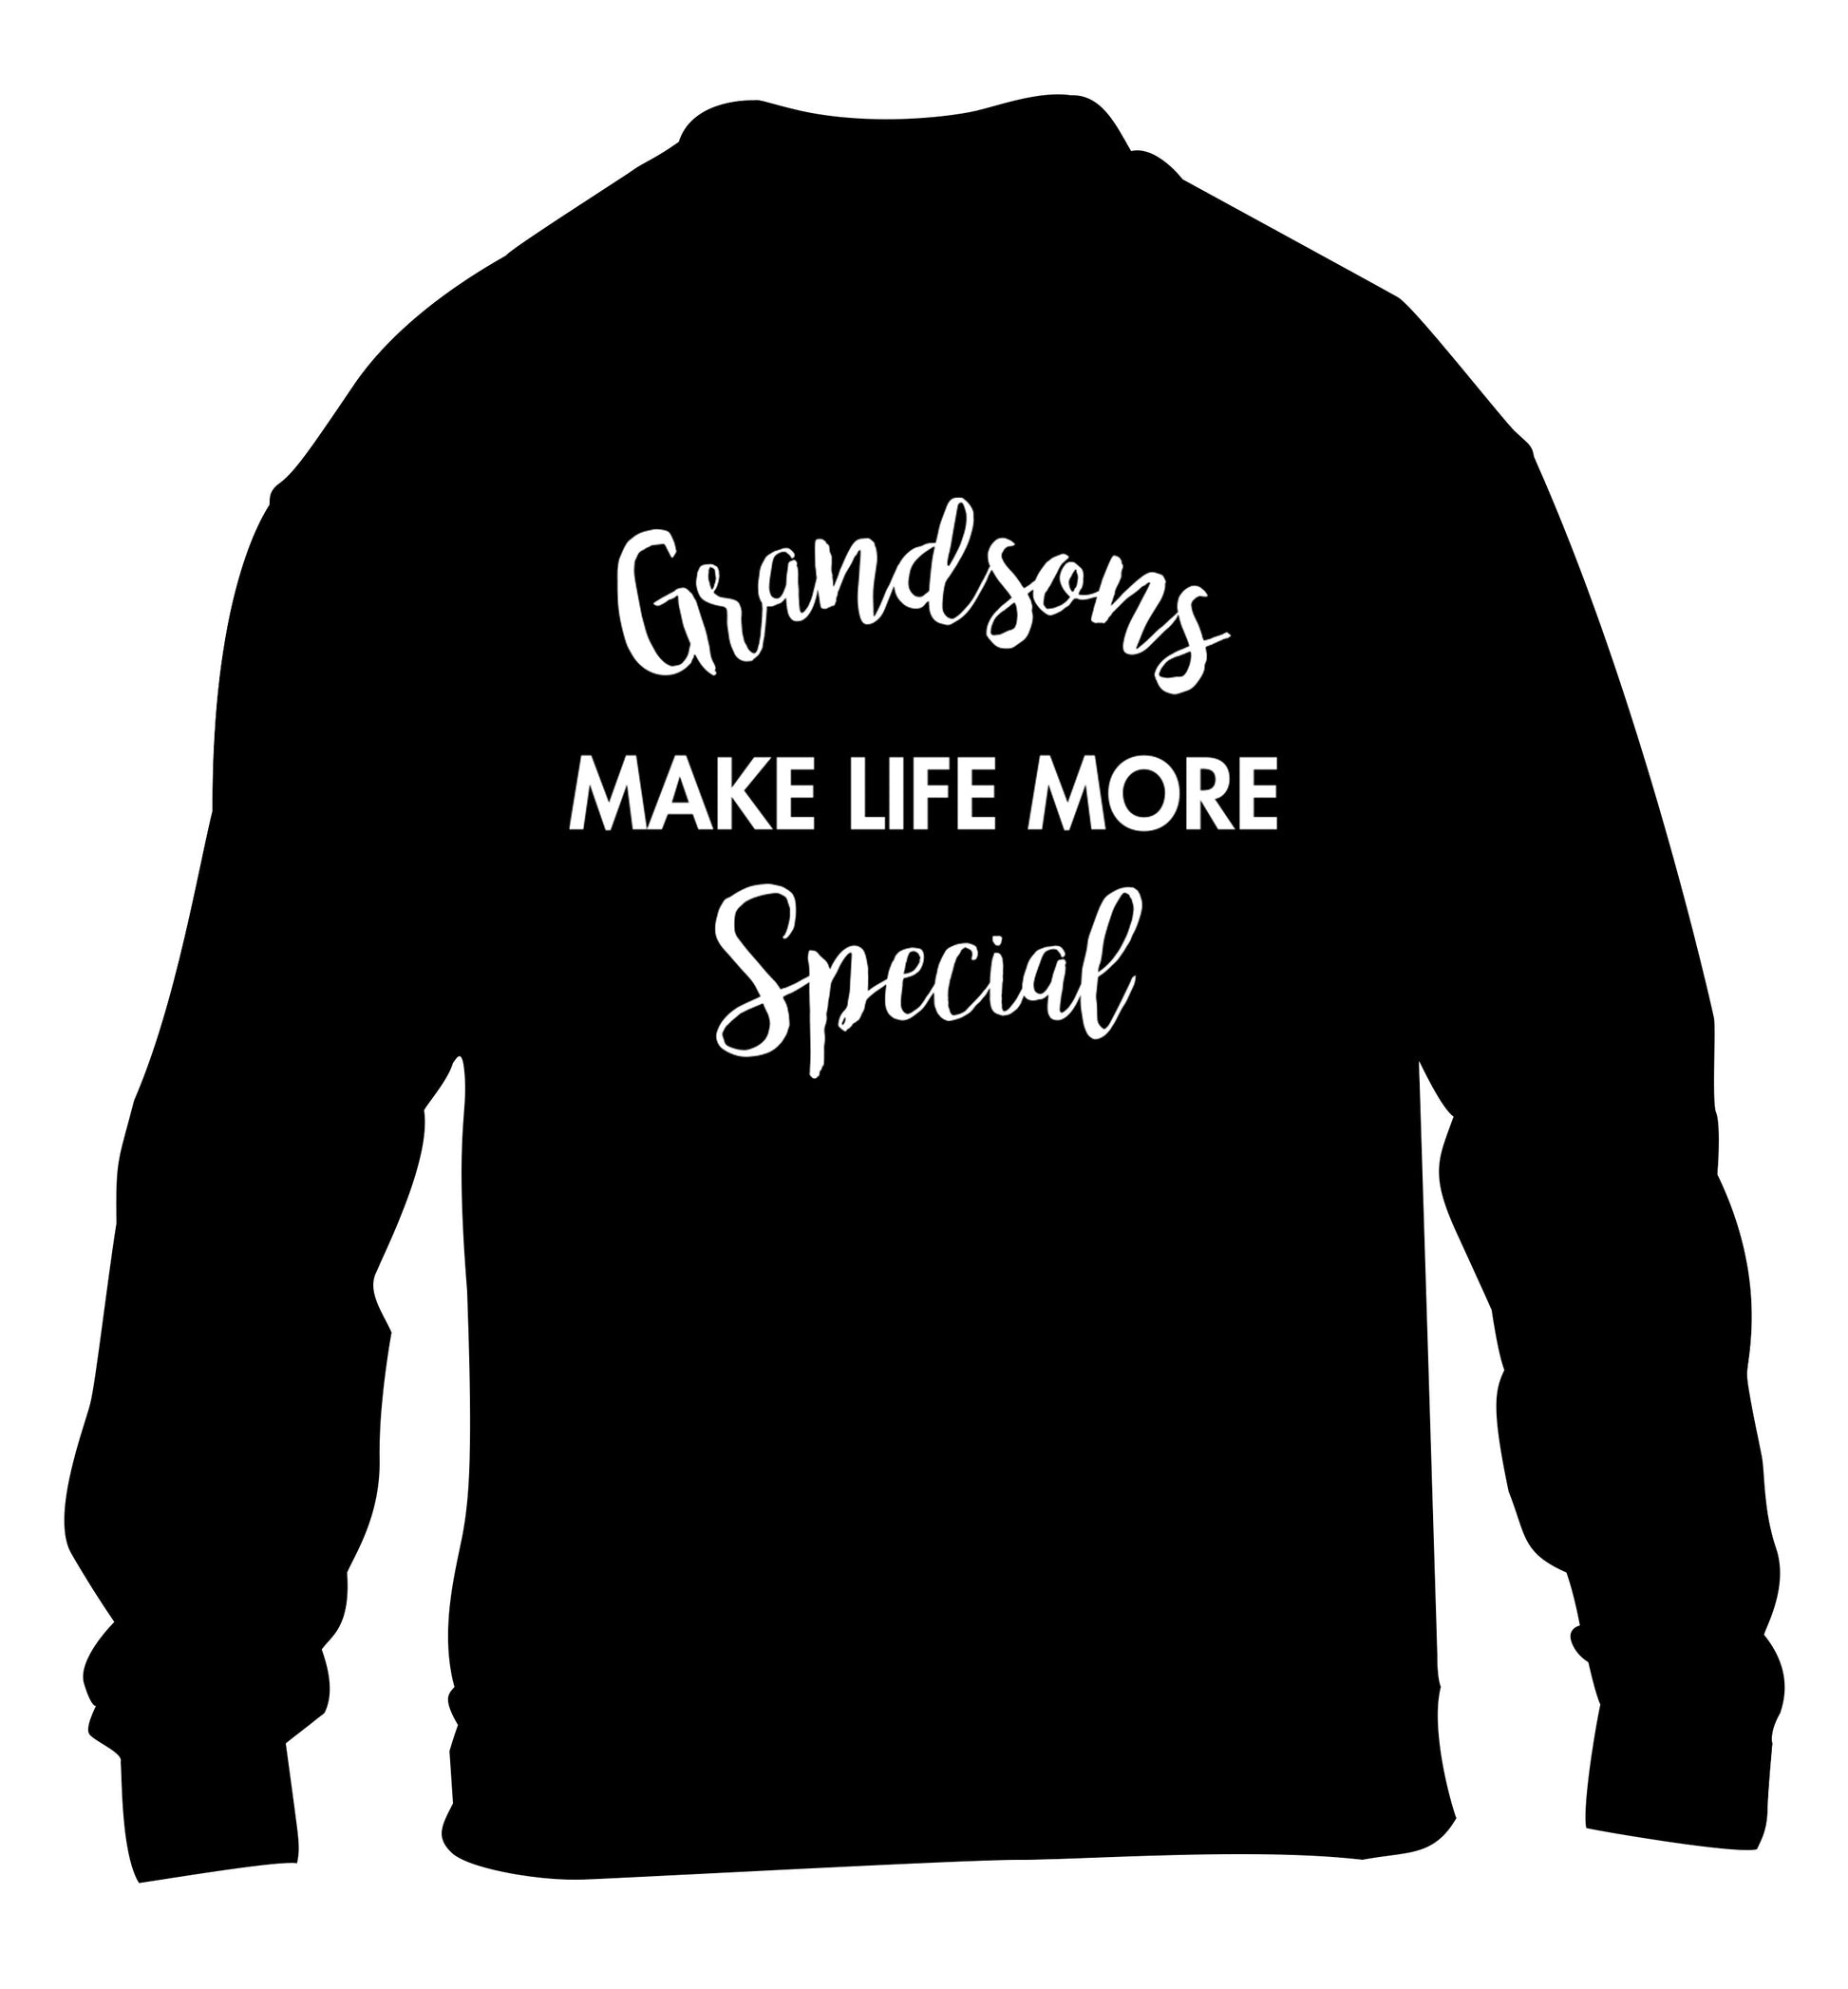 Grandsons make life more special children's black sweater 12-14 Years